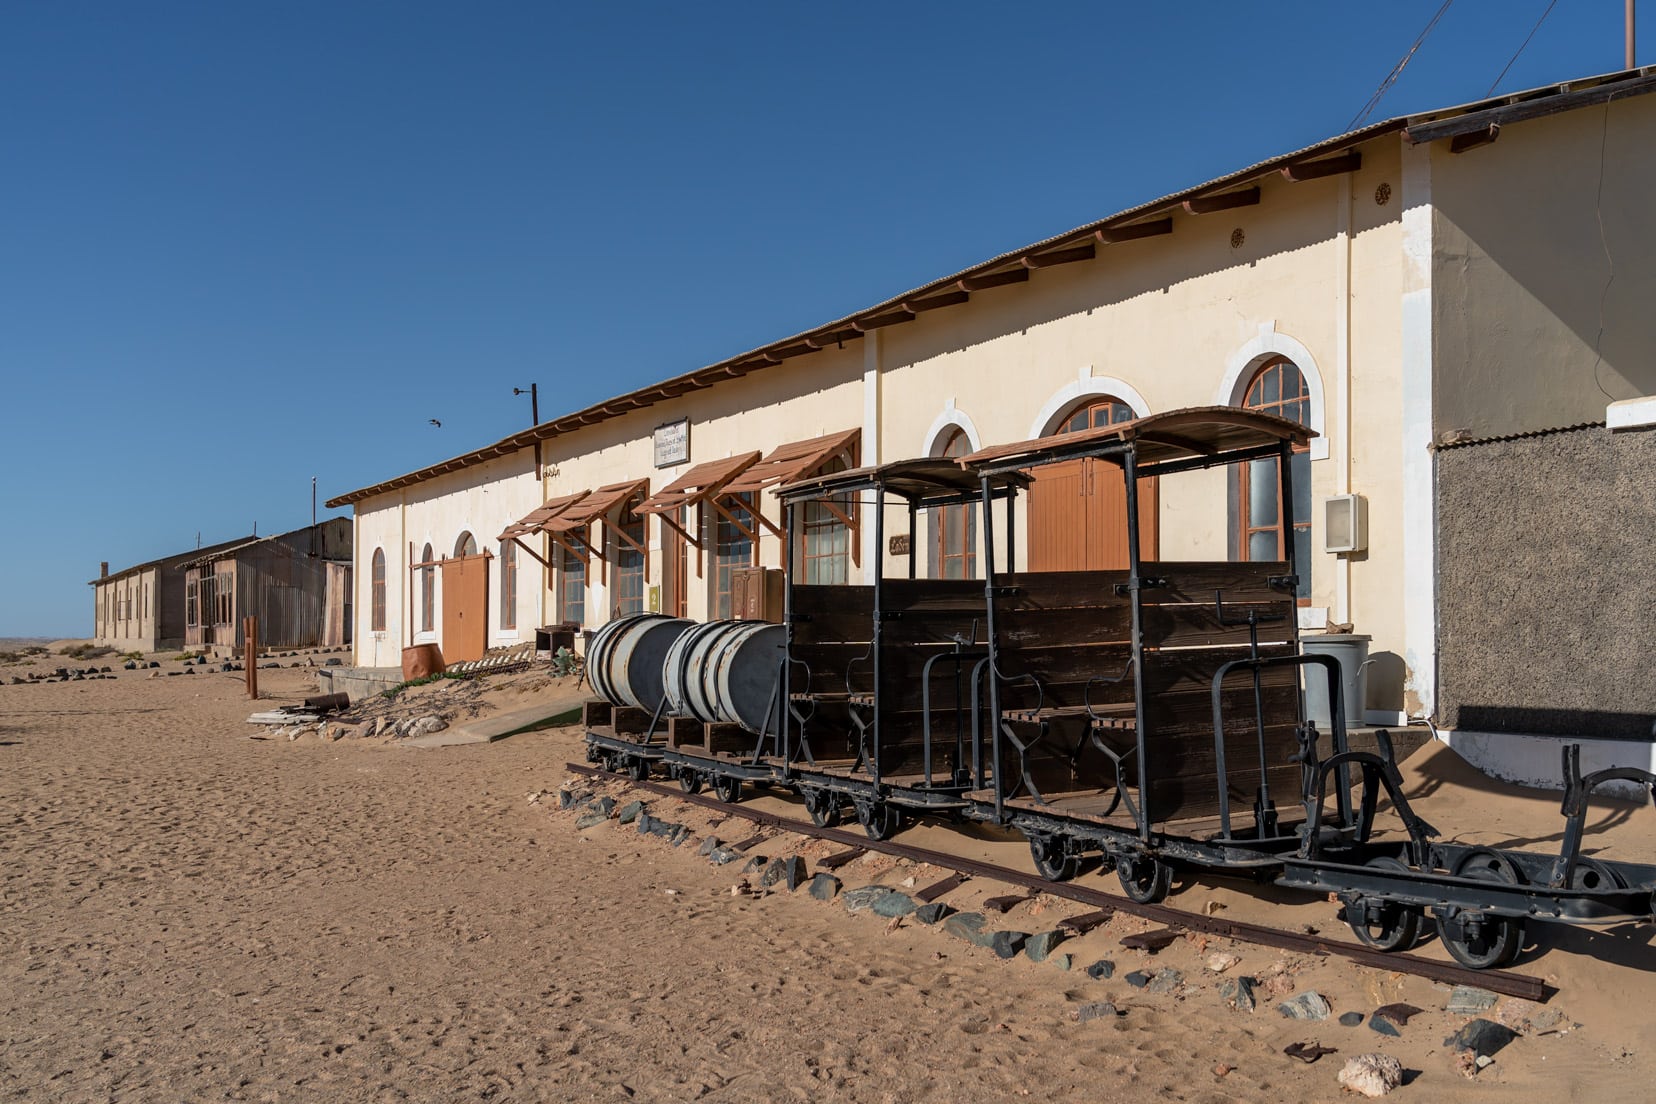 Kolmanskop Ghost Town train for moving ice to various parts of the town